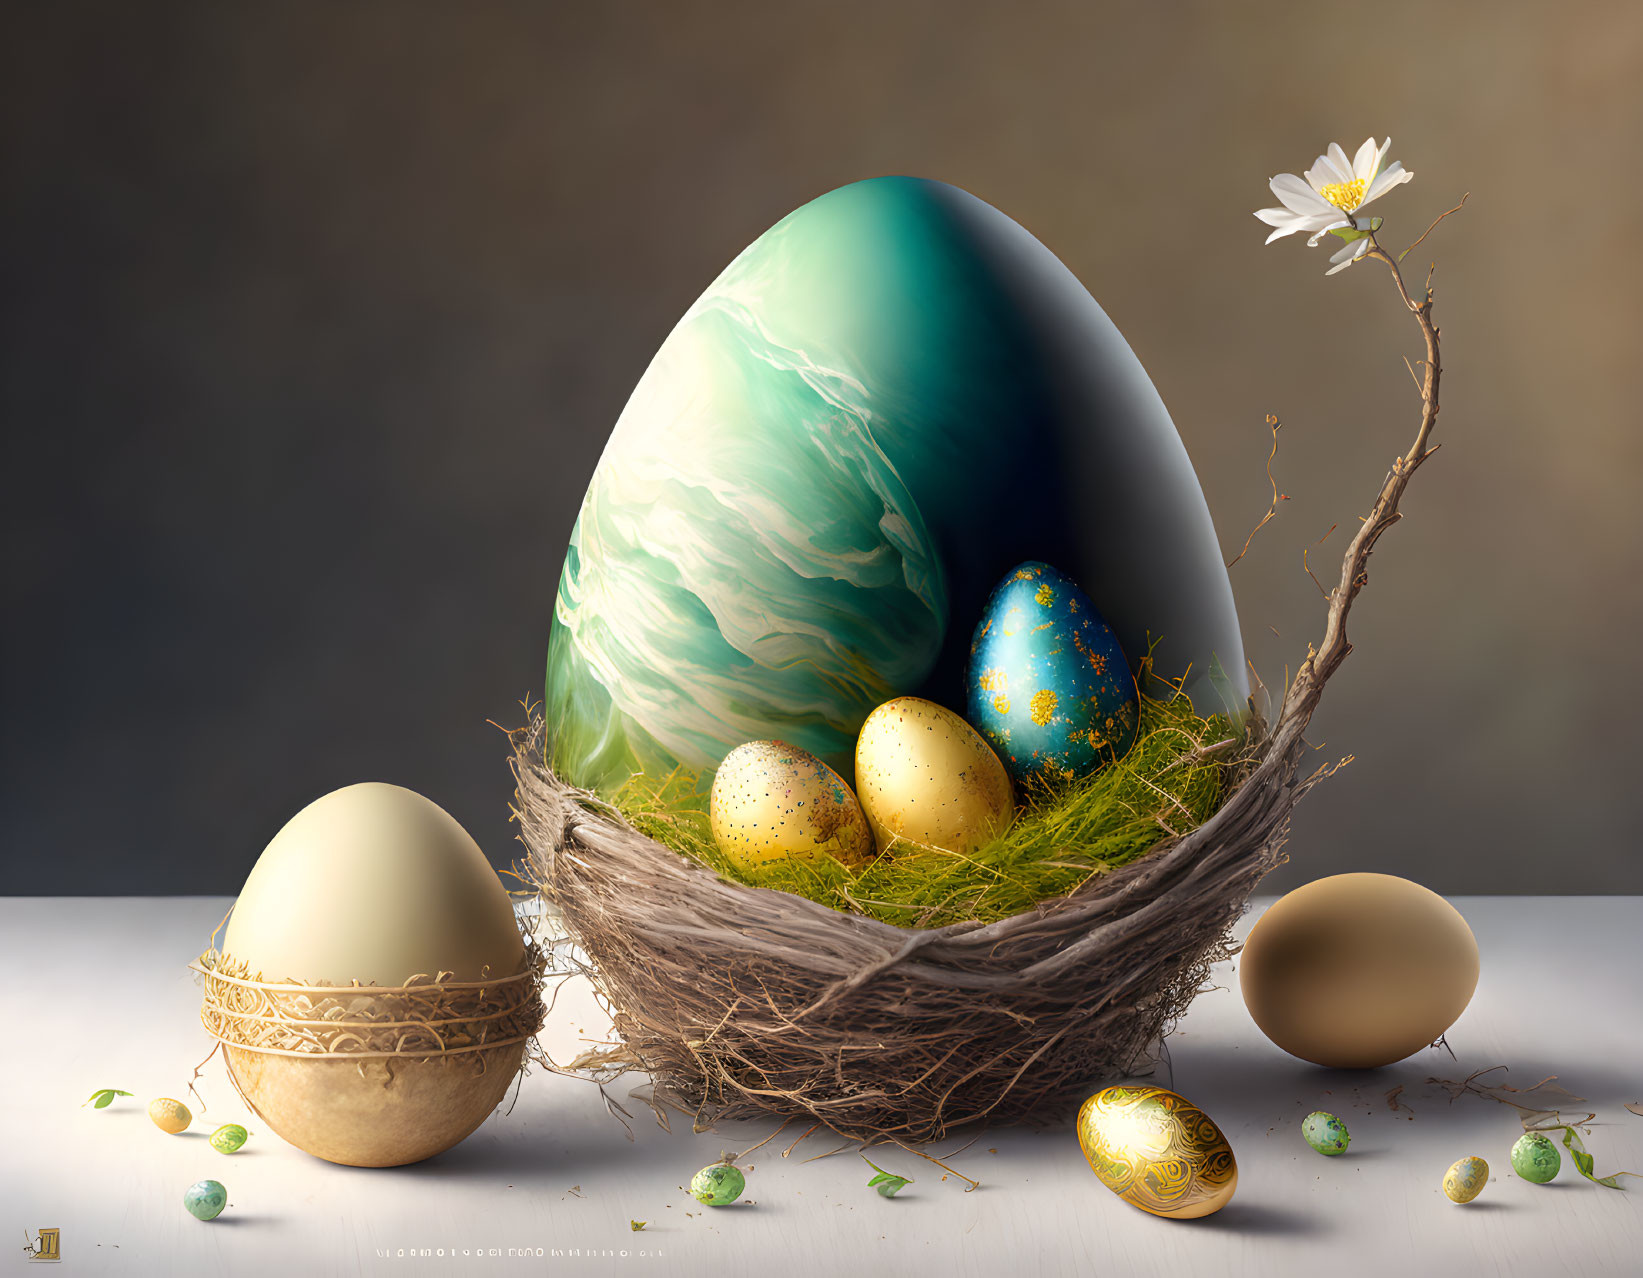 Decorative teal and white egg in nest with flower and twigs